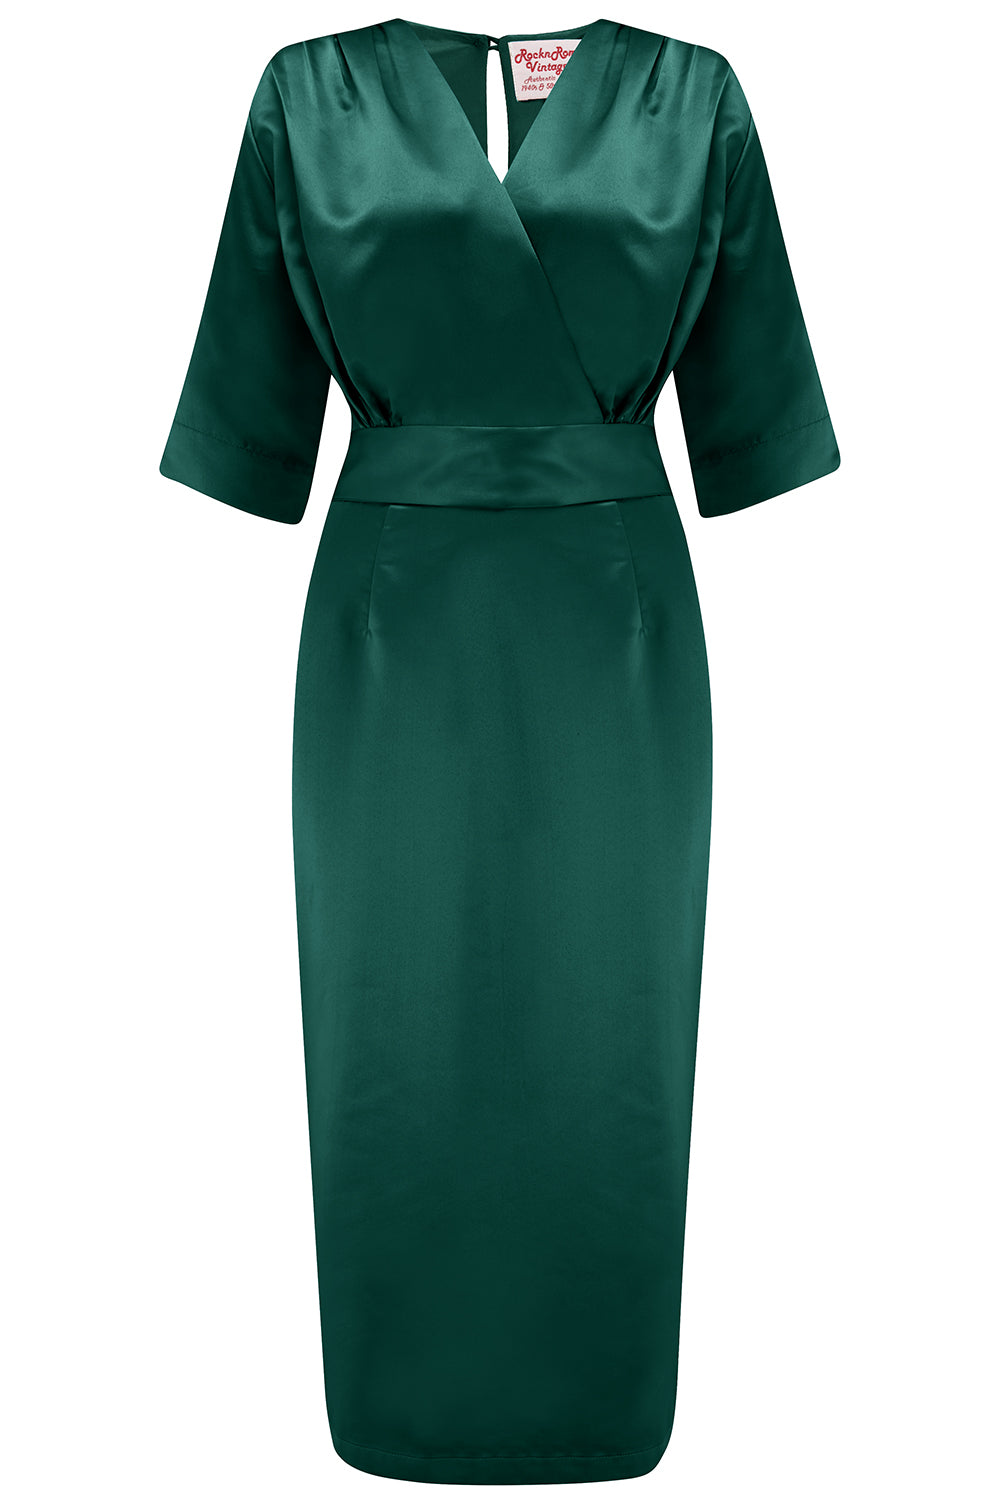 RnR "Luxe" Range.. The “Evelyn" Wiggle Dress in Super Luxurious Azure Green SATIN